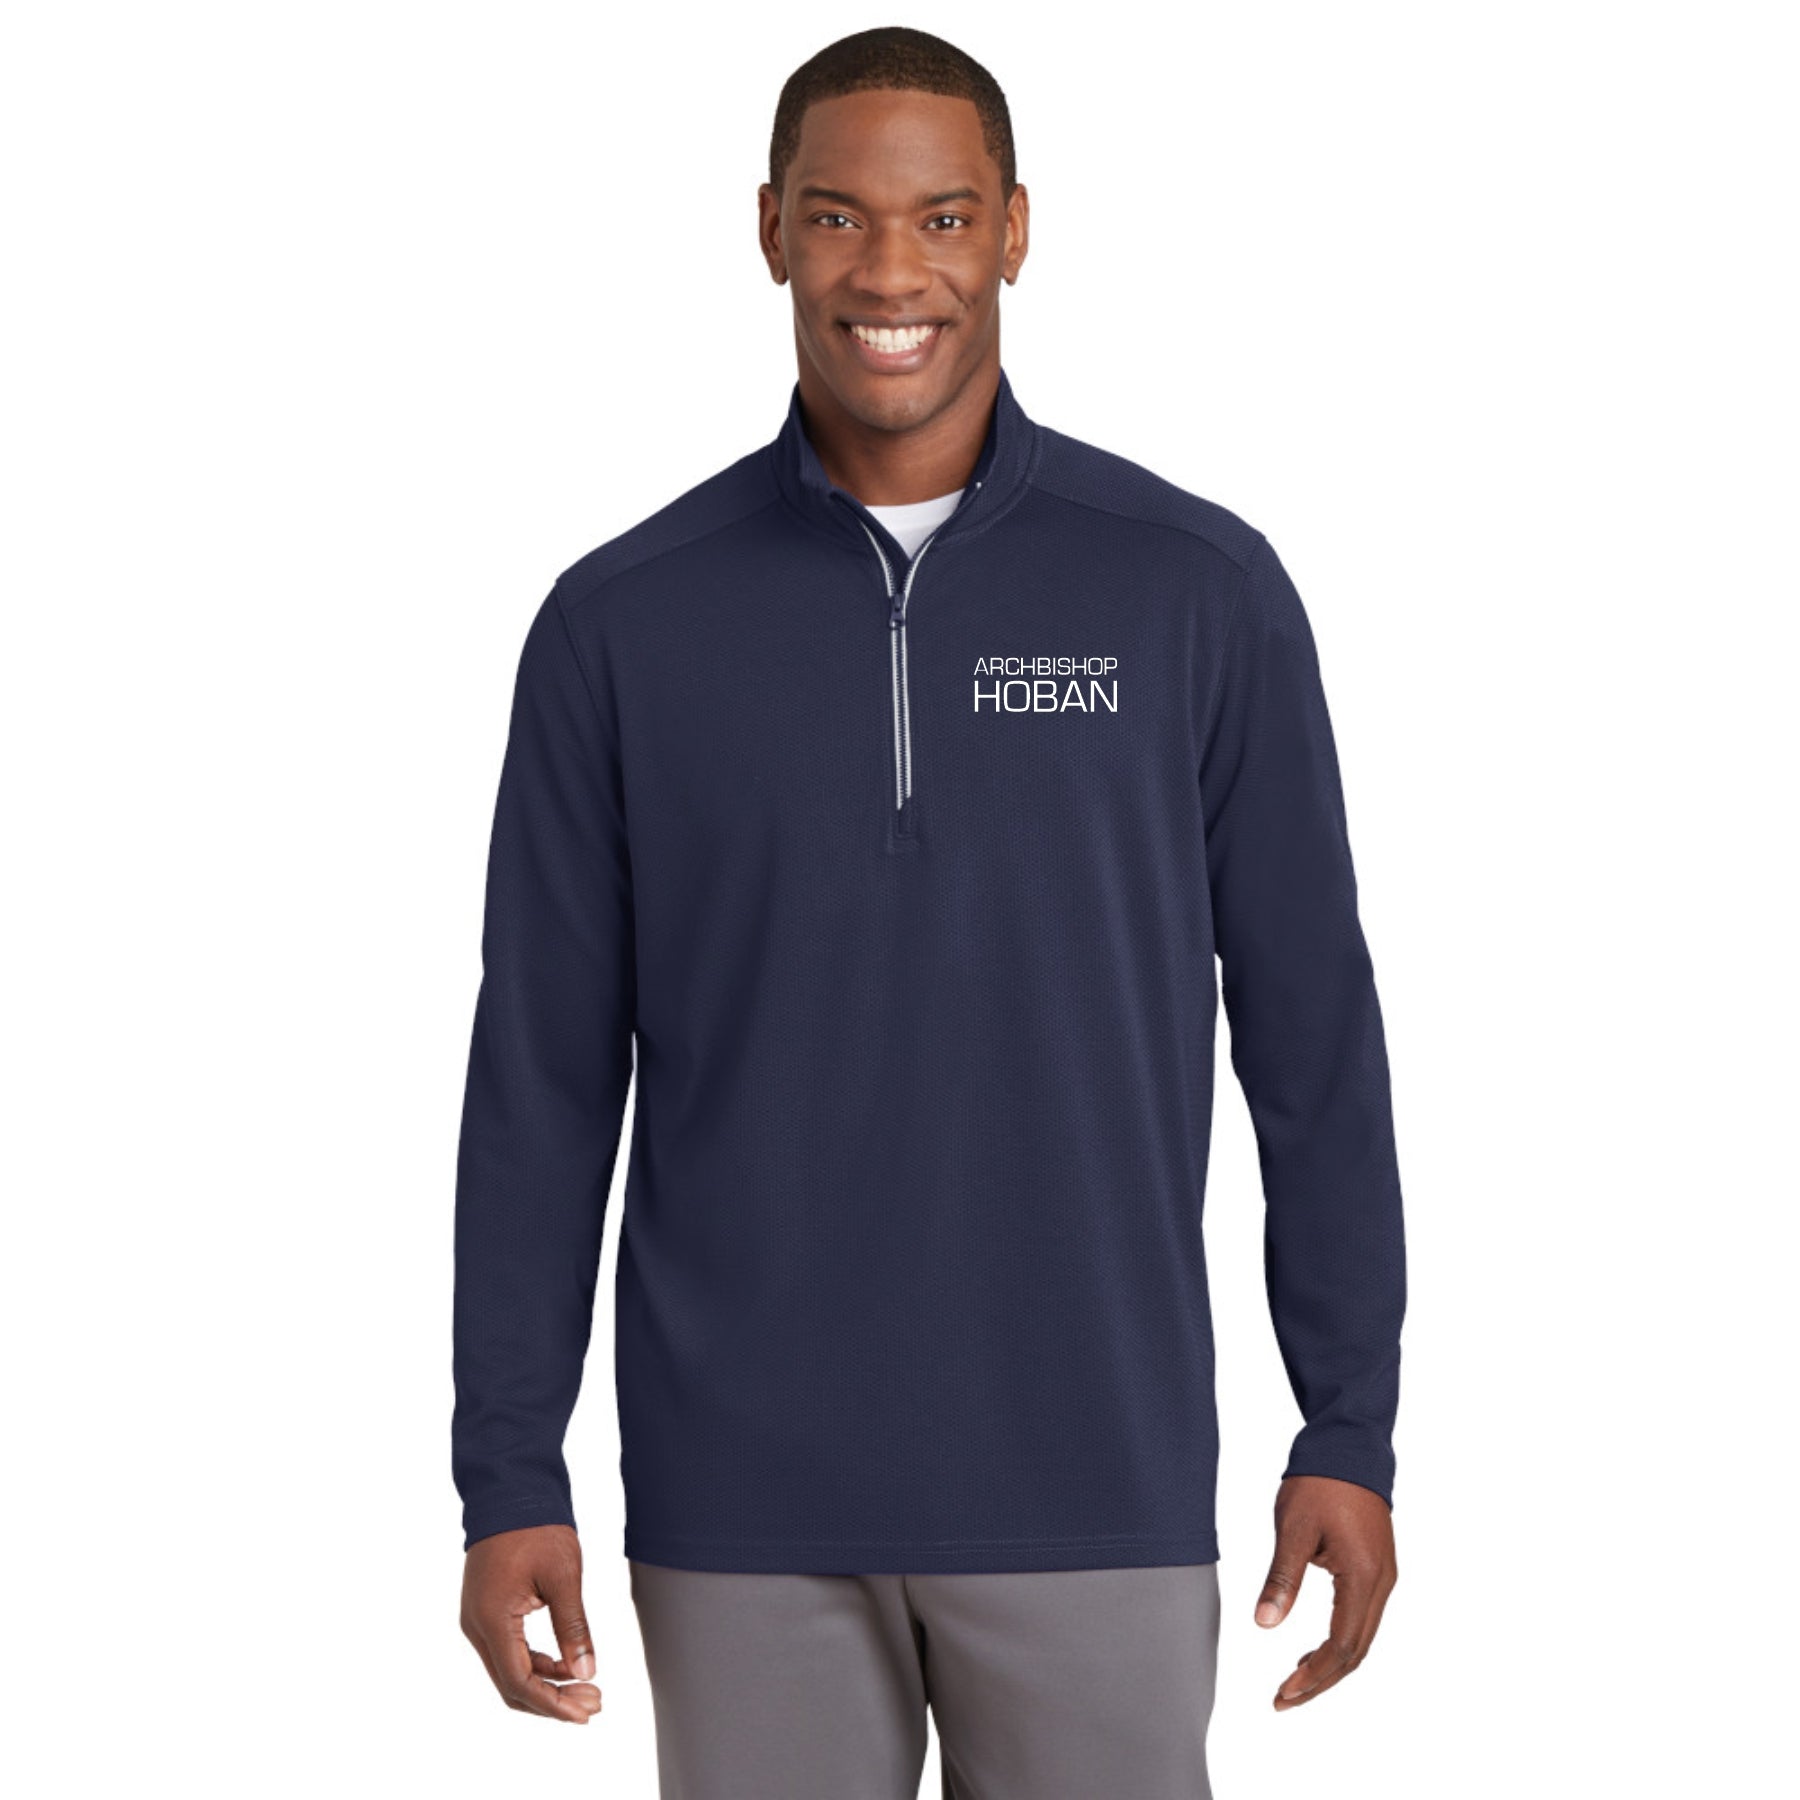 Unisex Textured Quarter Zip Pullover by Sport-Tek (click for more color options)